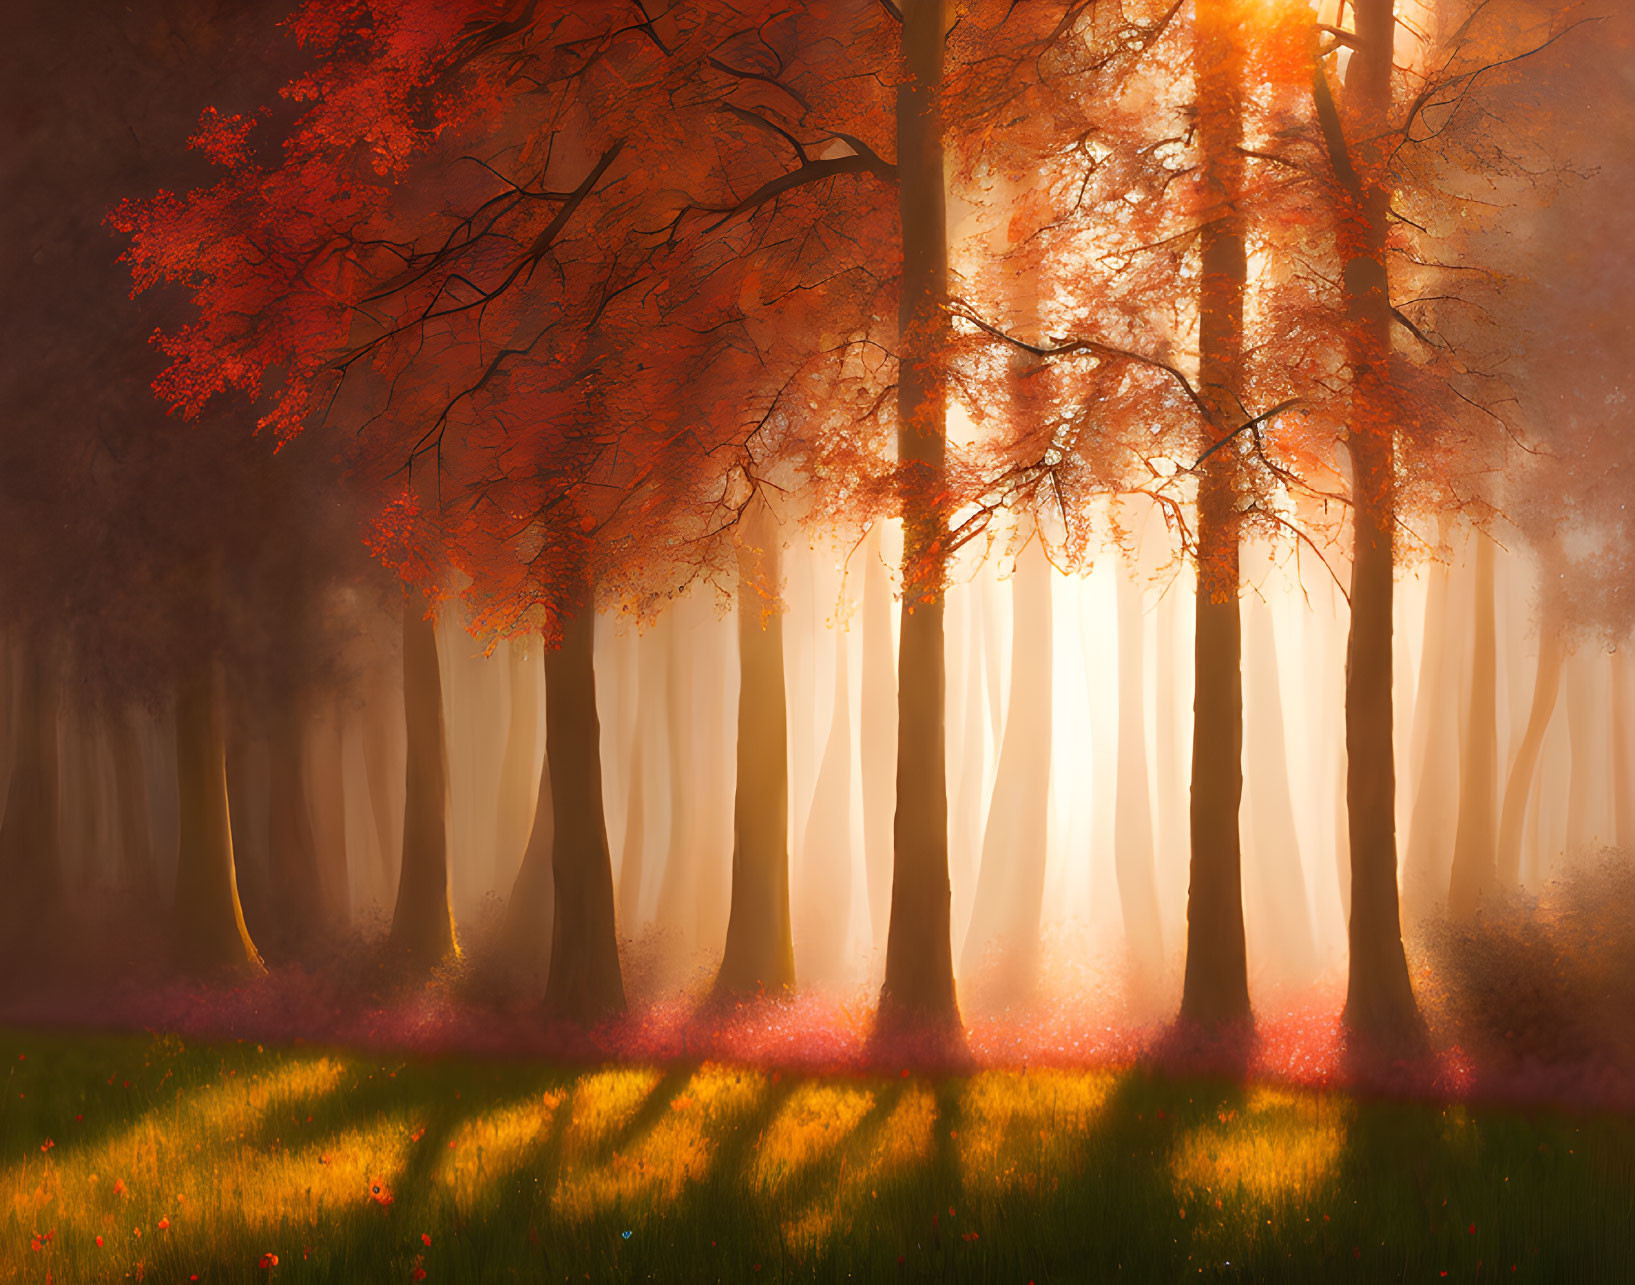 Misty forest with vibrant orange and red foliage in sunlight